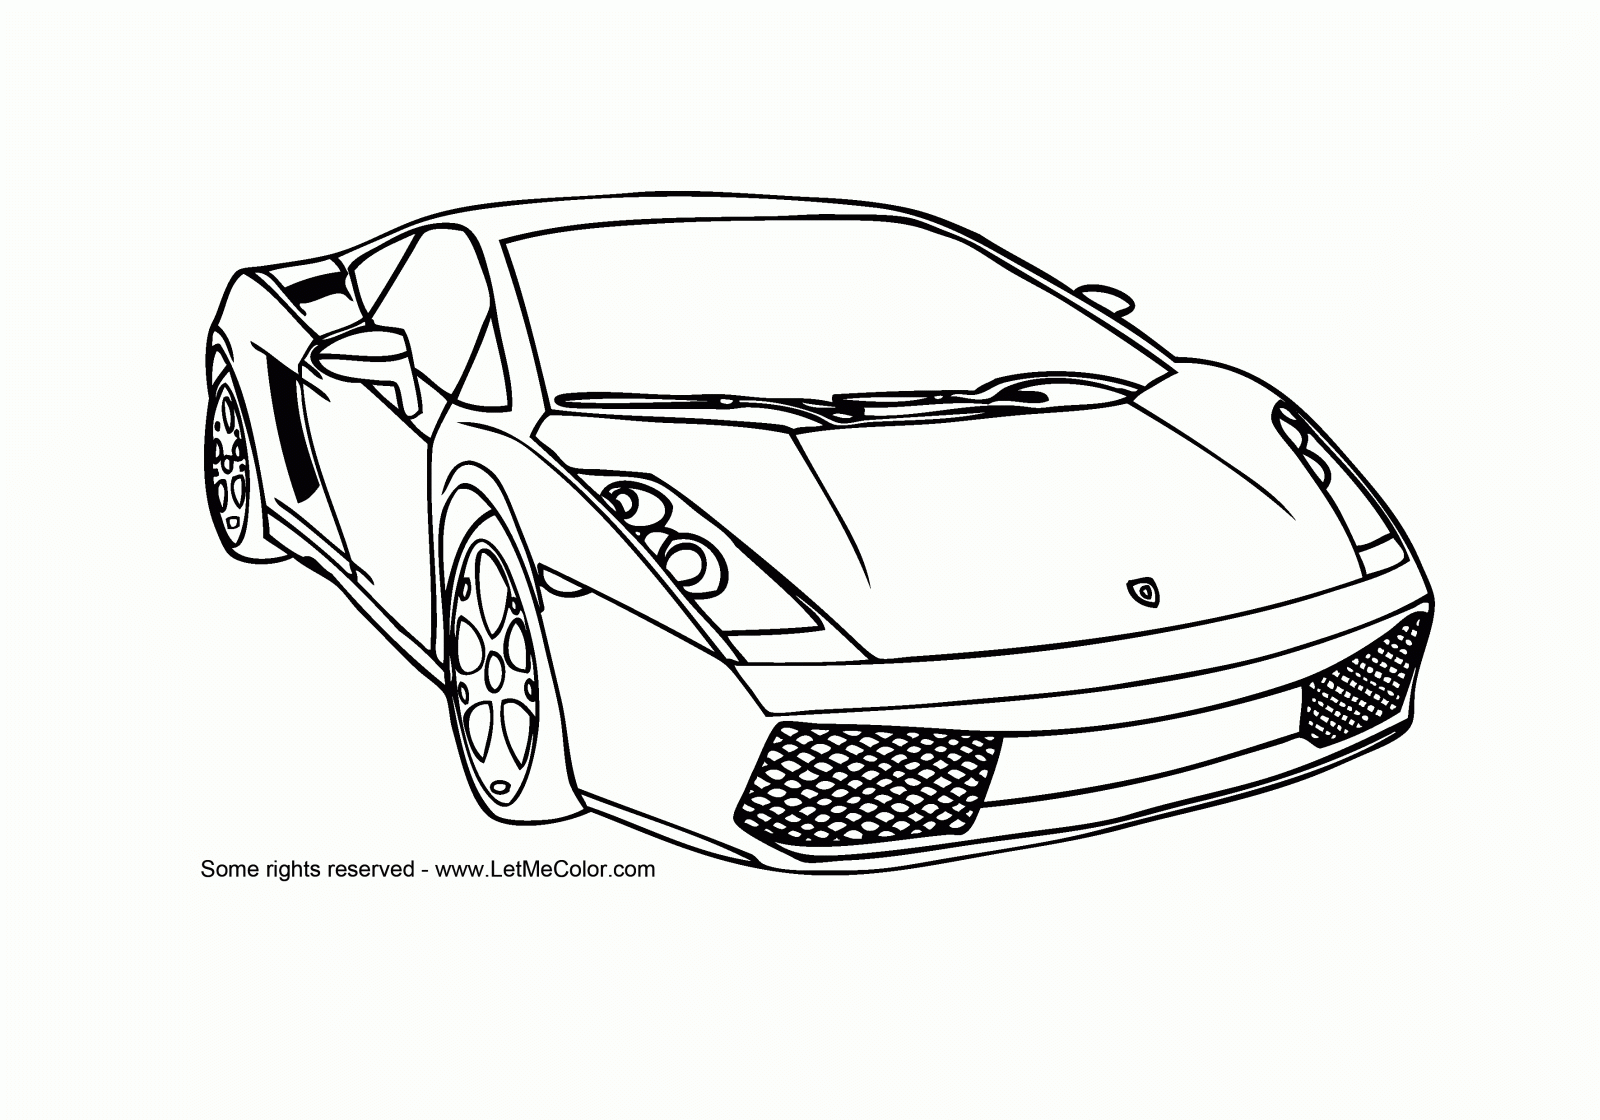 Ingenuity 25 Sports Car Coloring Pages For Children 14 Printable